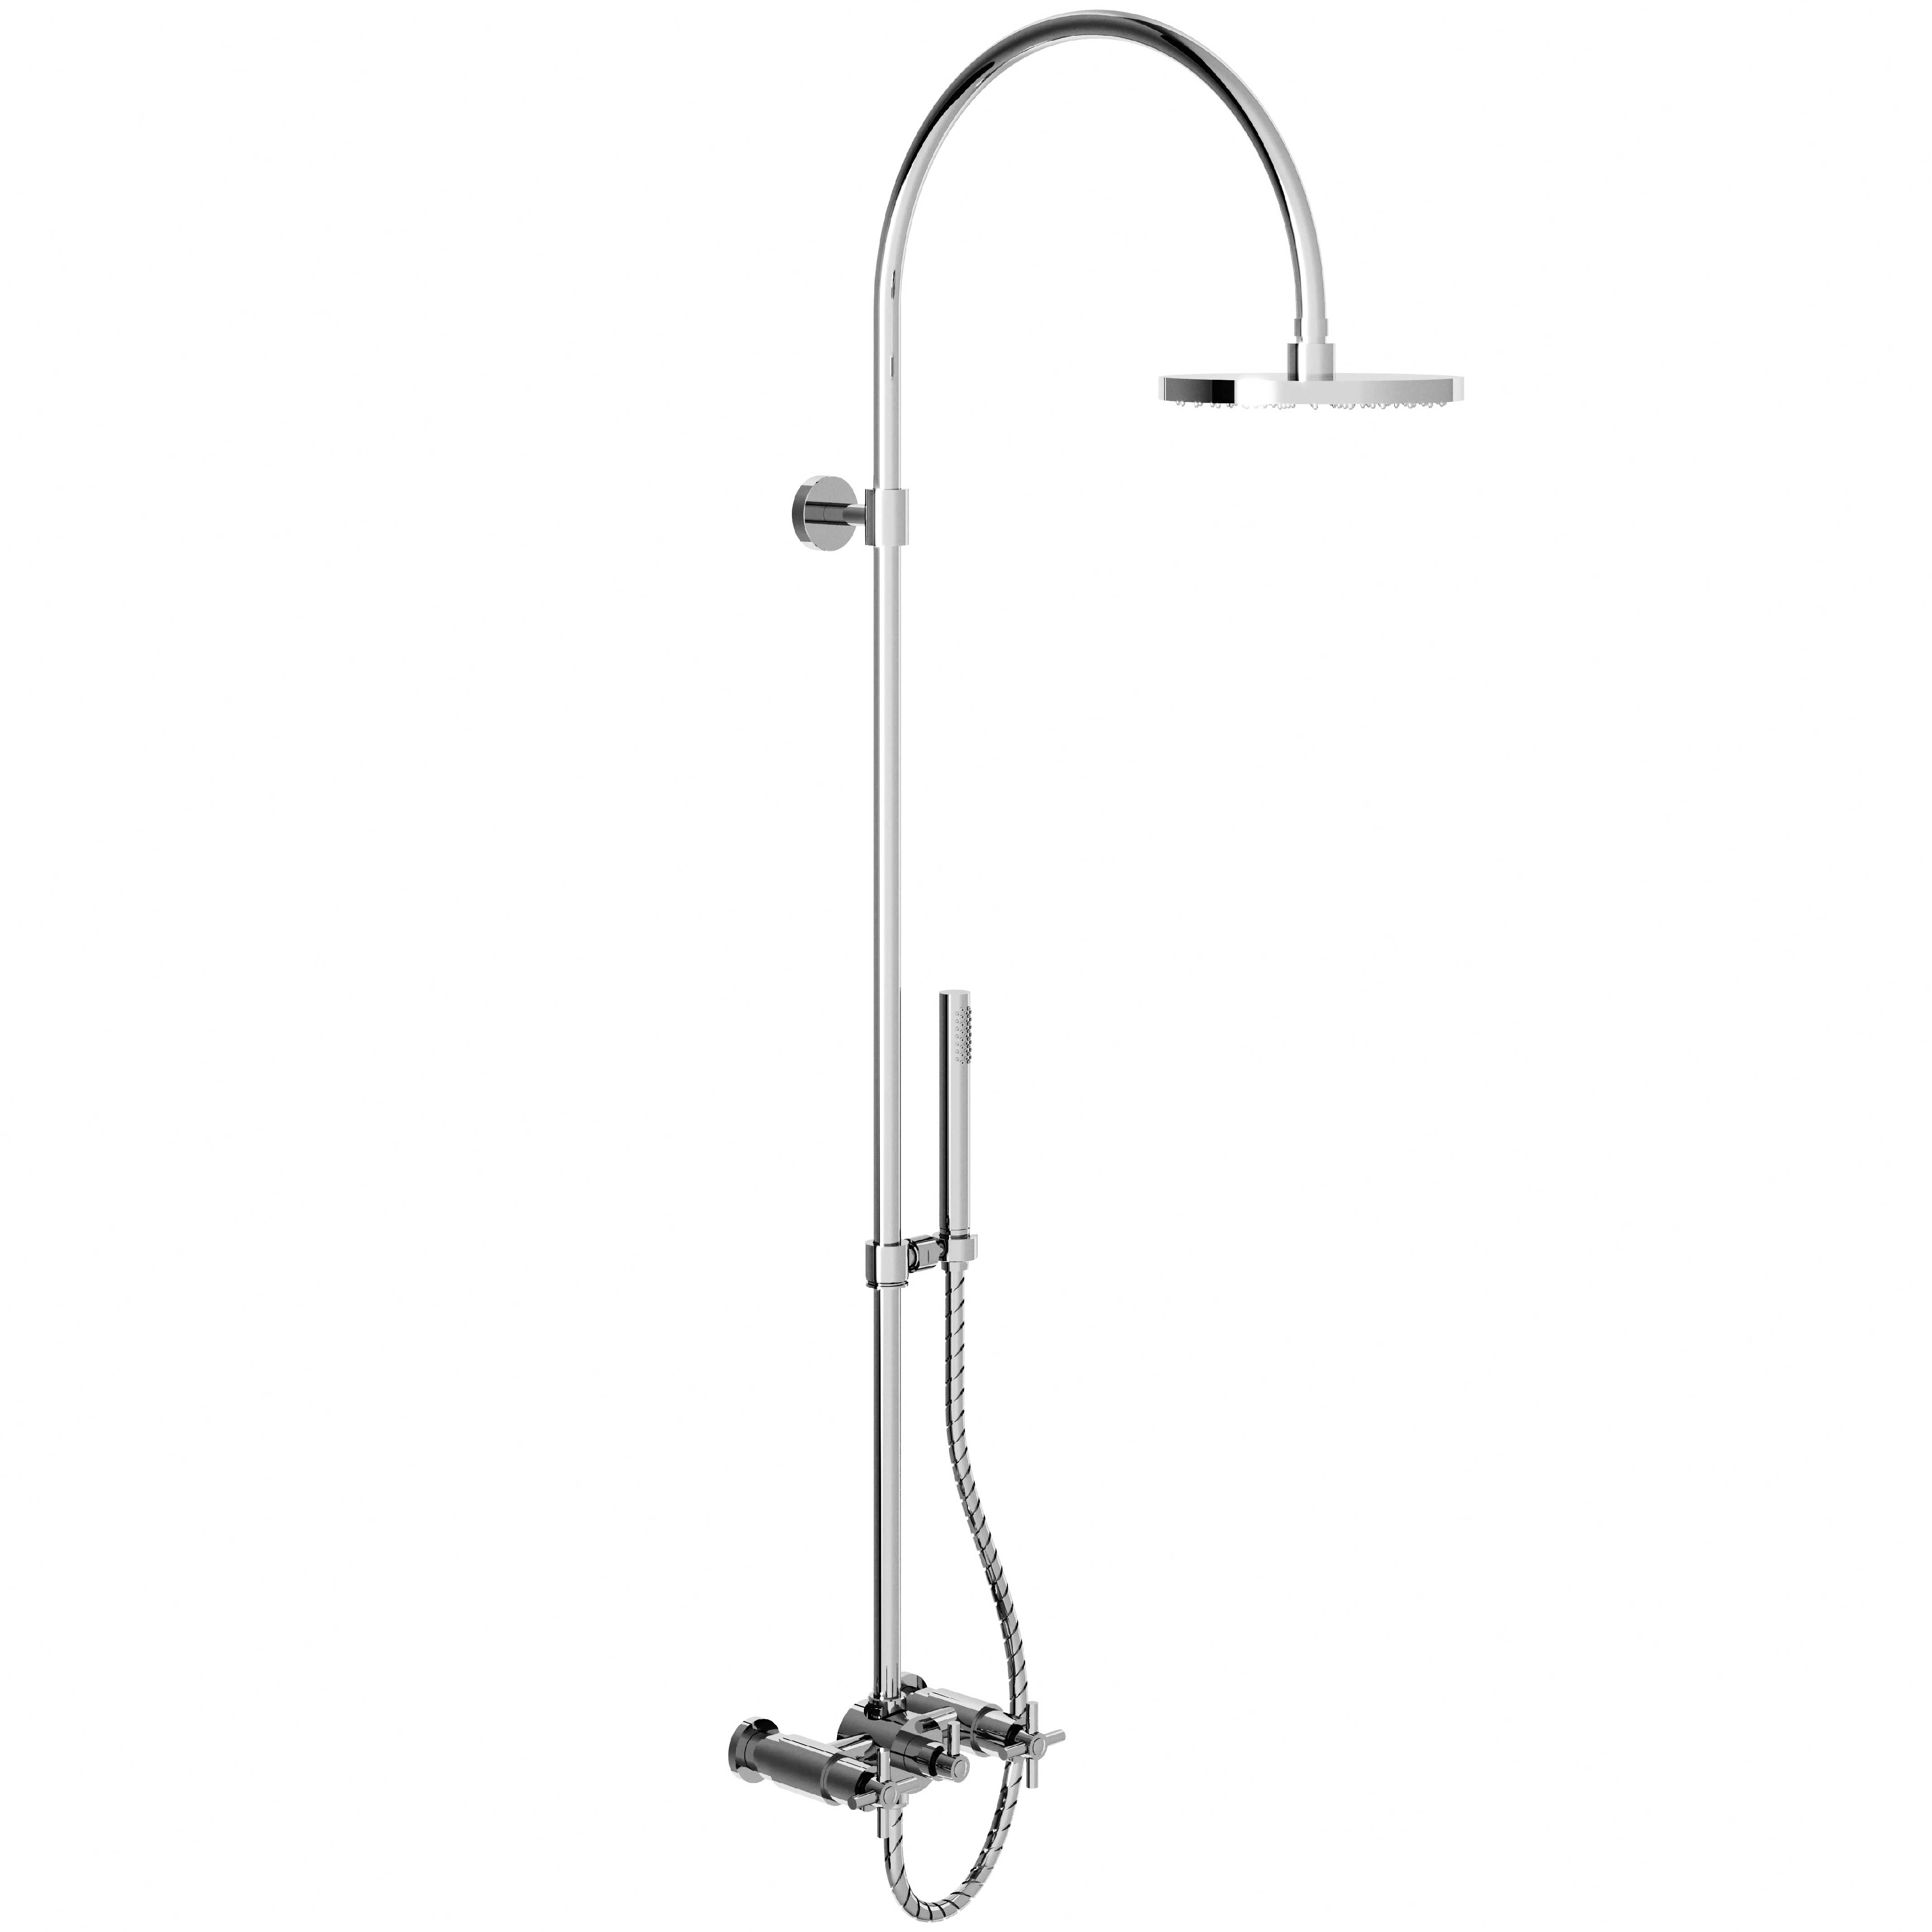 M90-2204 Shower mixer with column, anti-scaling